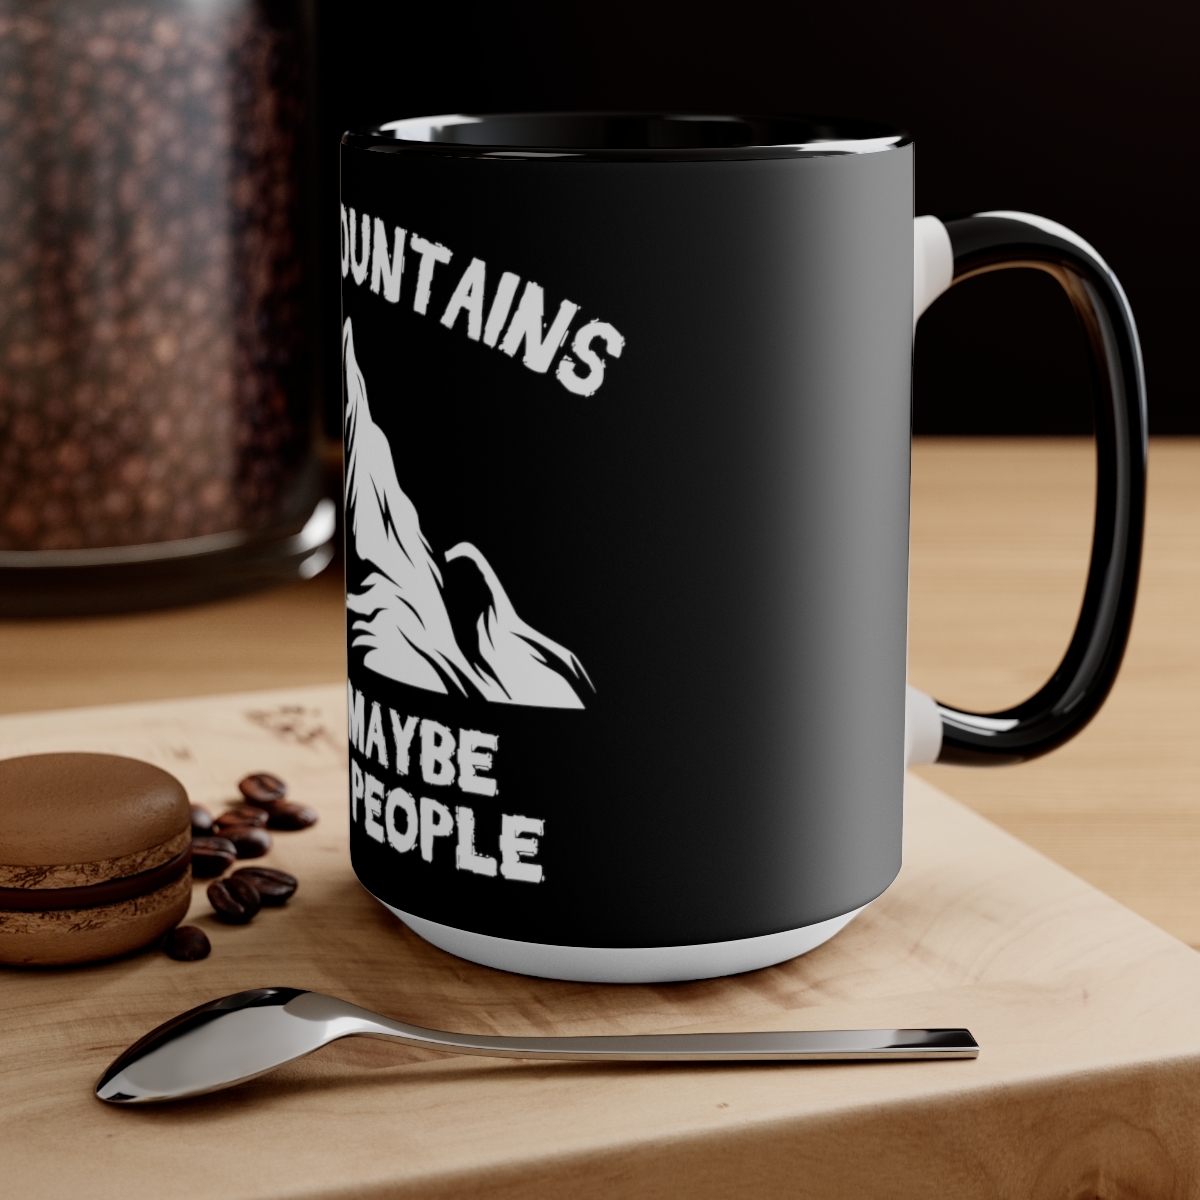 Customizable Two-Tone Accent Mug: Elevate Your Drinkware with Style and Durabili - $26.78 - $37.08